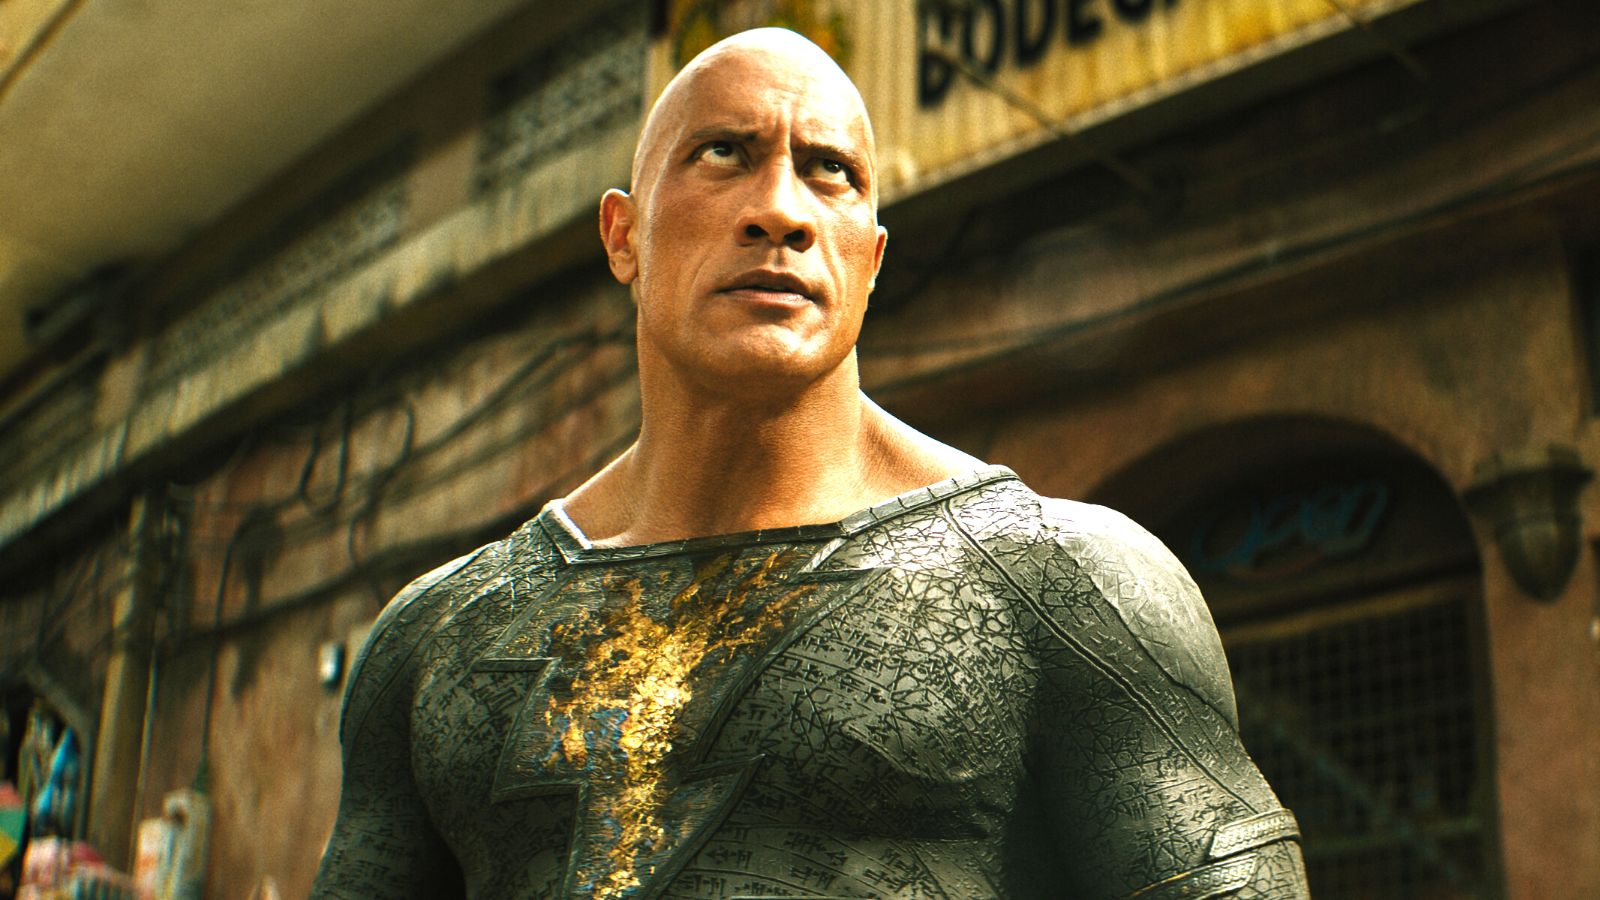 DC fans want ‘Black Adam’ to succeed for reasons that have nothing to do with the movie